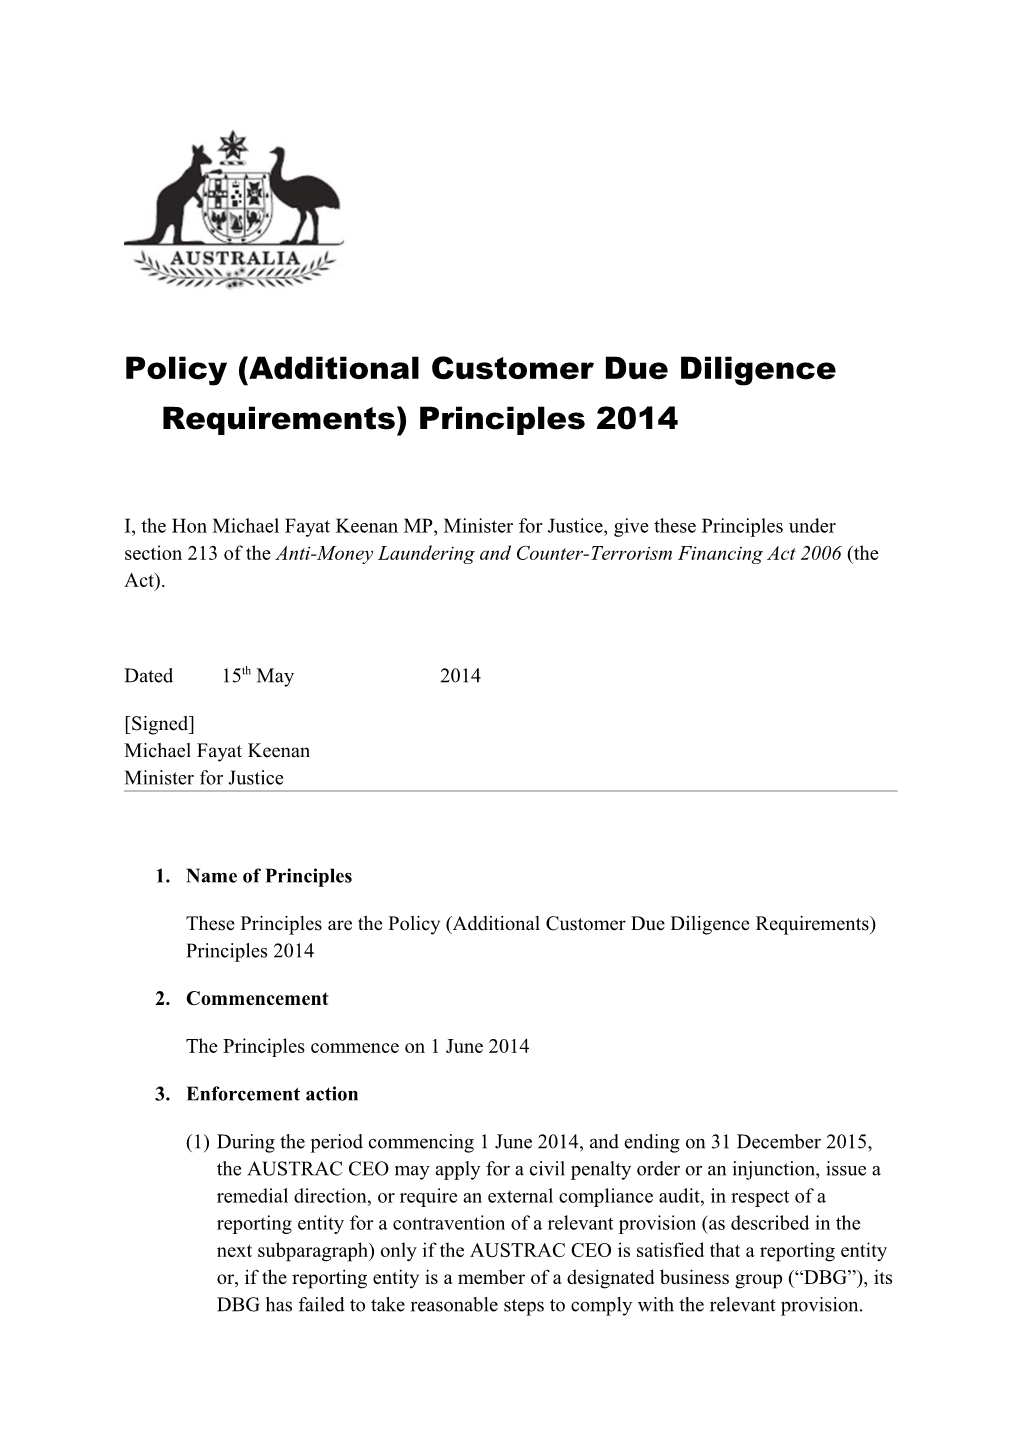 Policy (Additional Customer Due Diligence Requirements) Principles 2014